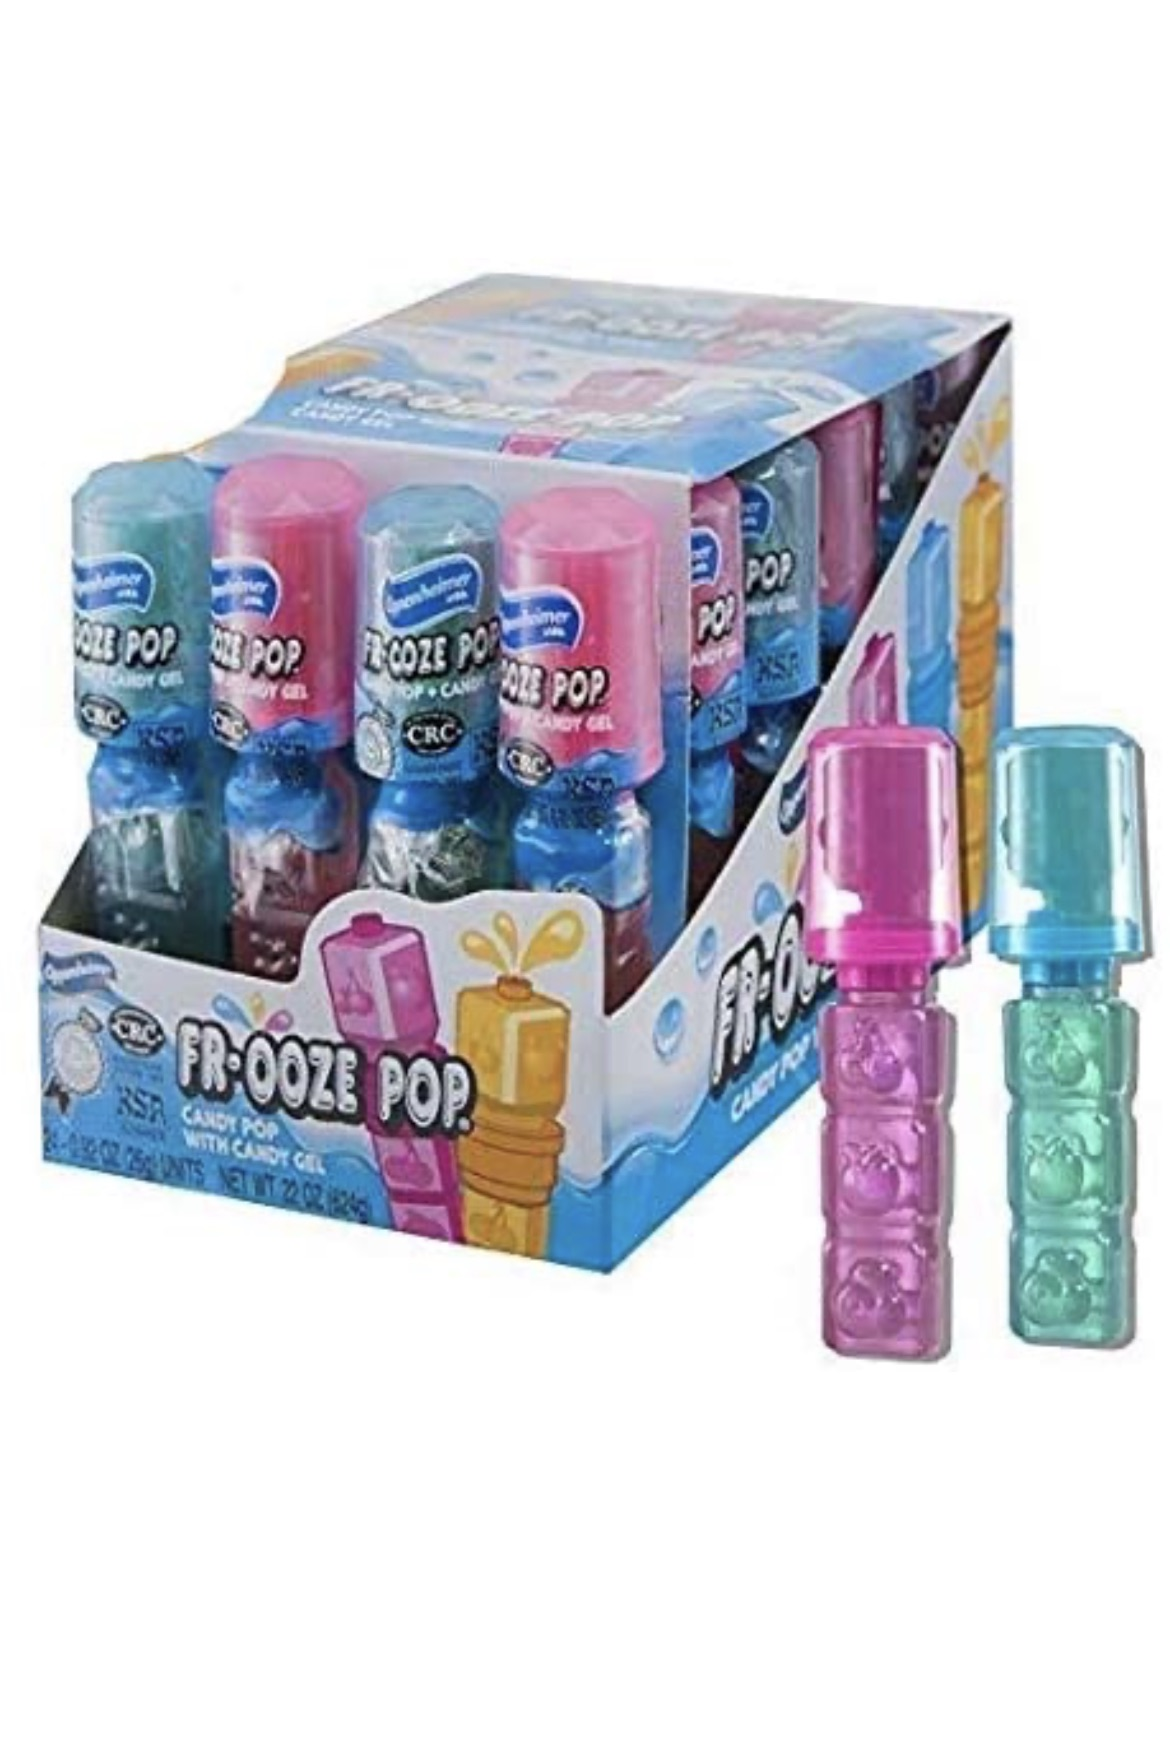 Frooze pops candy